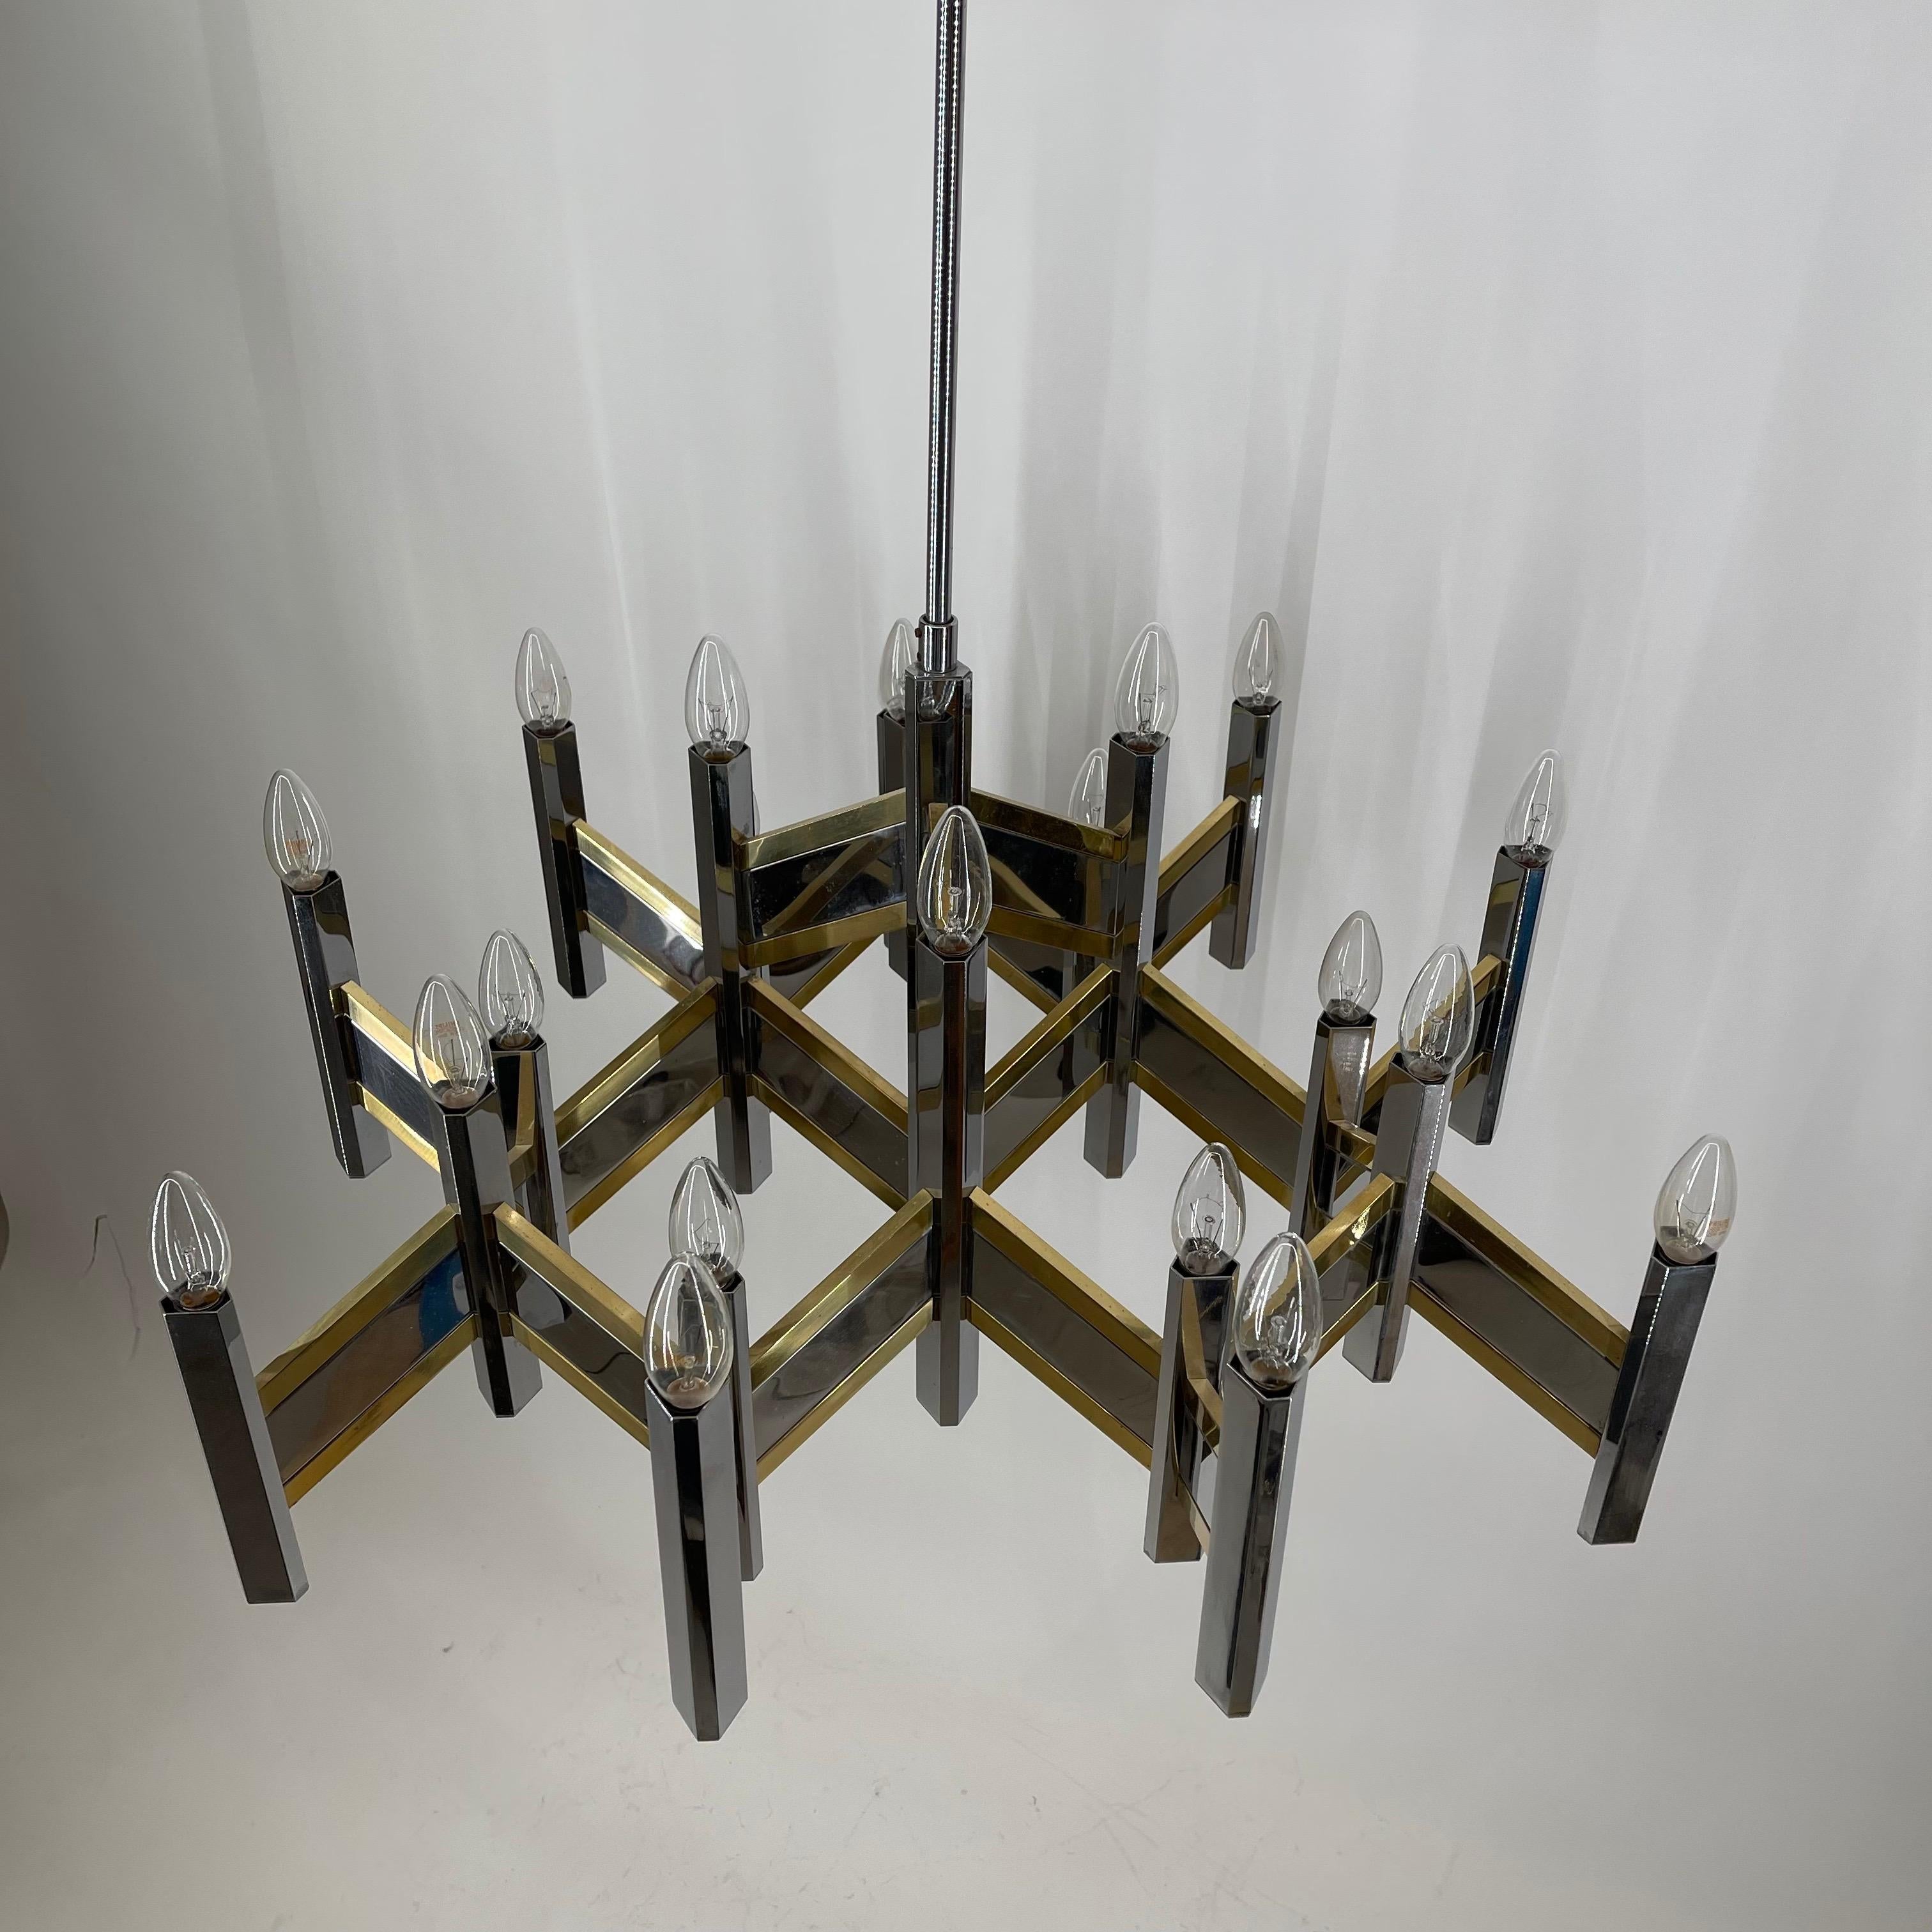 Huge 21 light bulb Sciolari brass and chrome model 'Concorde' chandelier, Italy 1970s. A fantastic design in a chevron geometric shape and very hard to find in this outstanding size. 